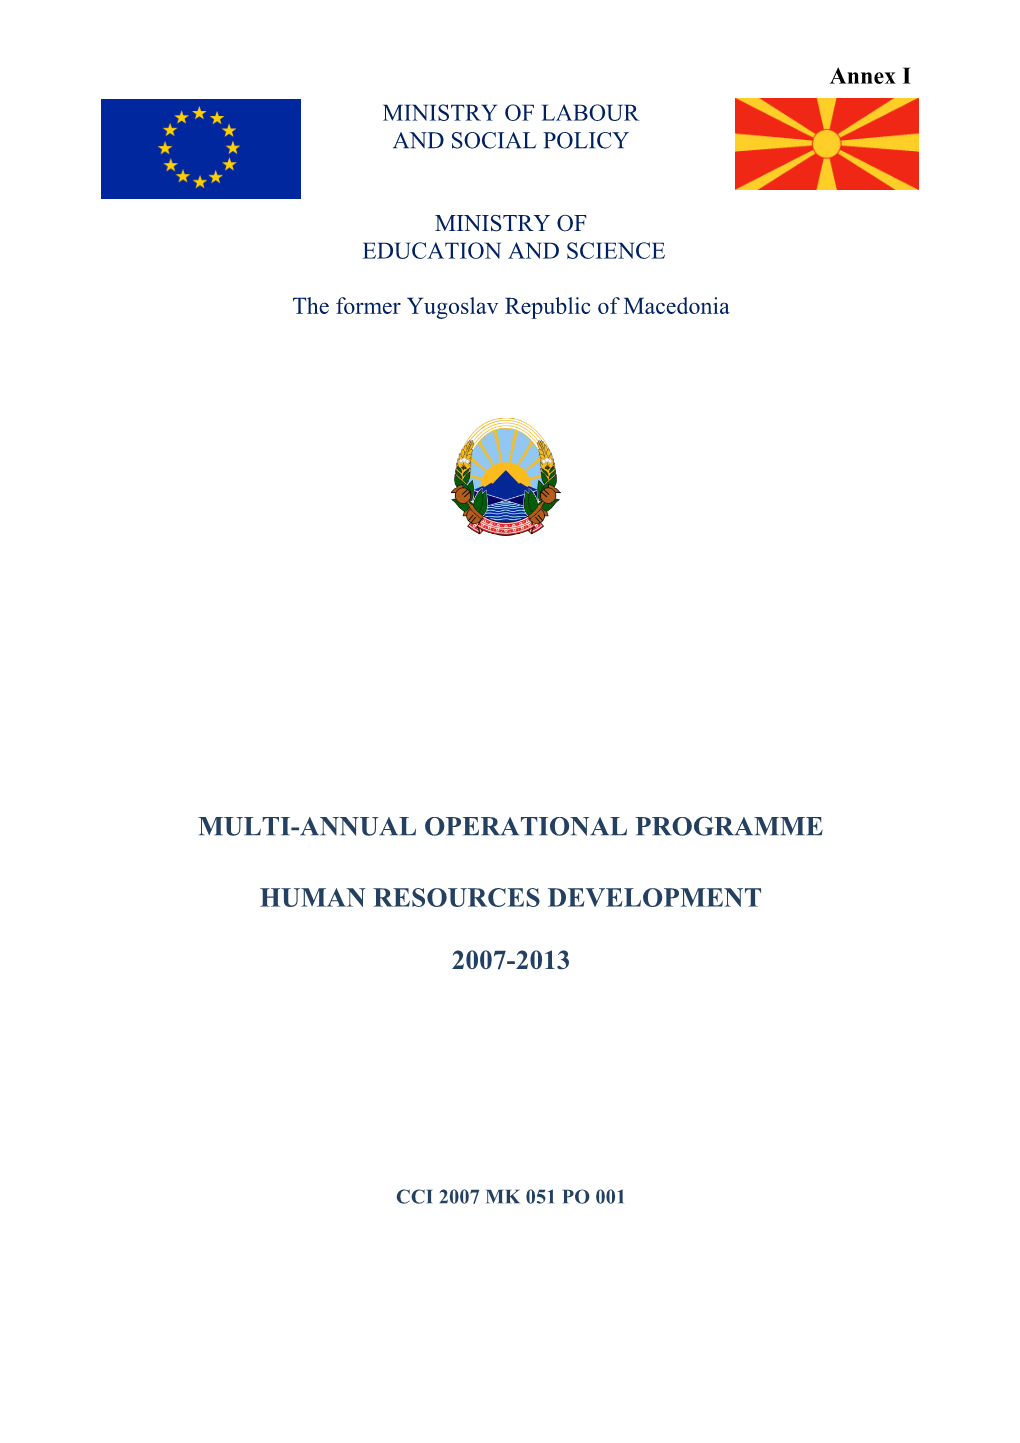 Multi-Annual Operational Programme